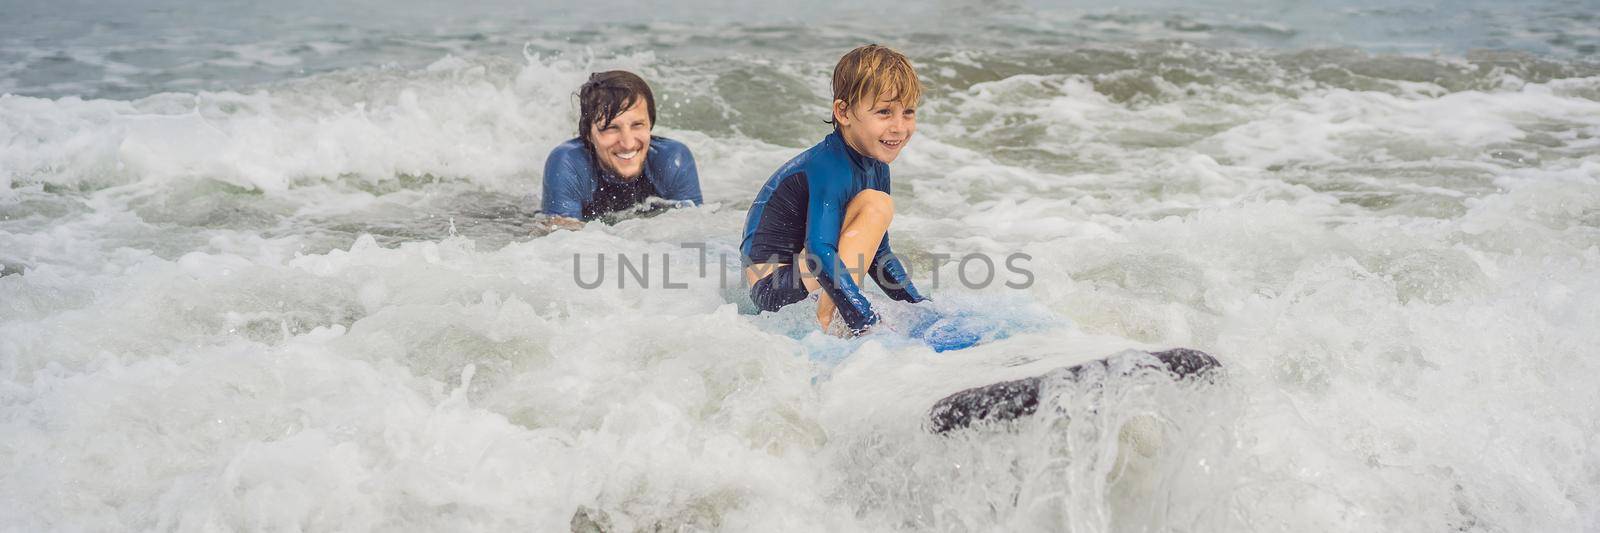 Father or instructor teaching his 5 year old son how to surf in the sea on vacation or holiday. Travel and sports with children concept. Surfing lesson for kids. BANNER, LONG FORMAT